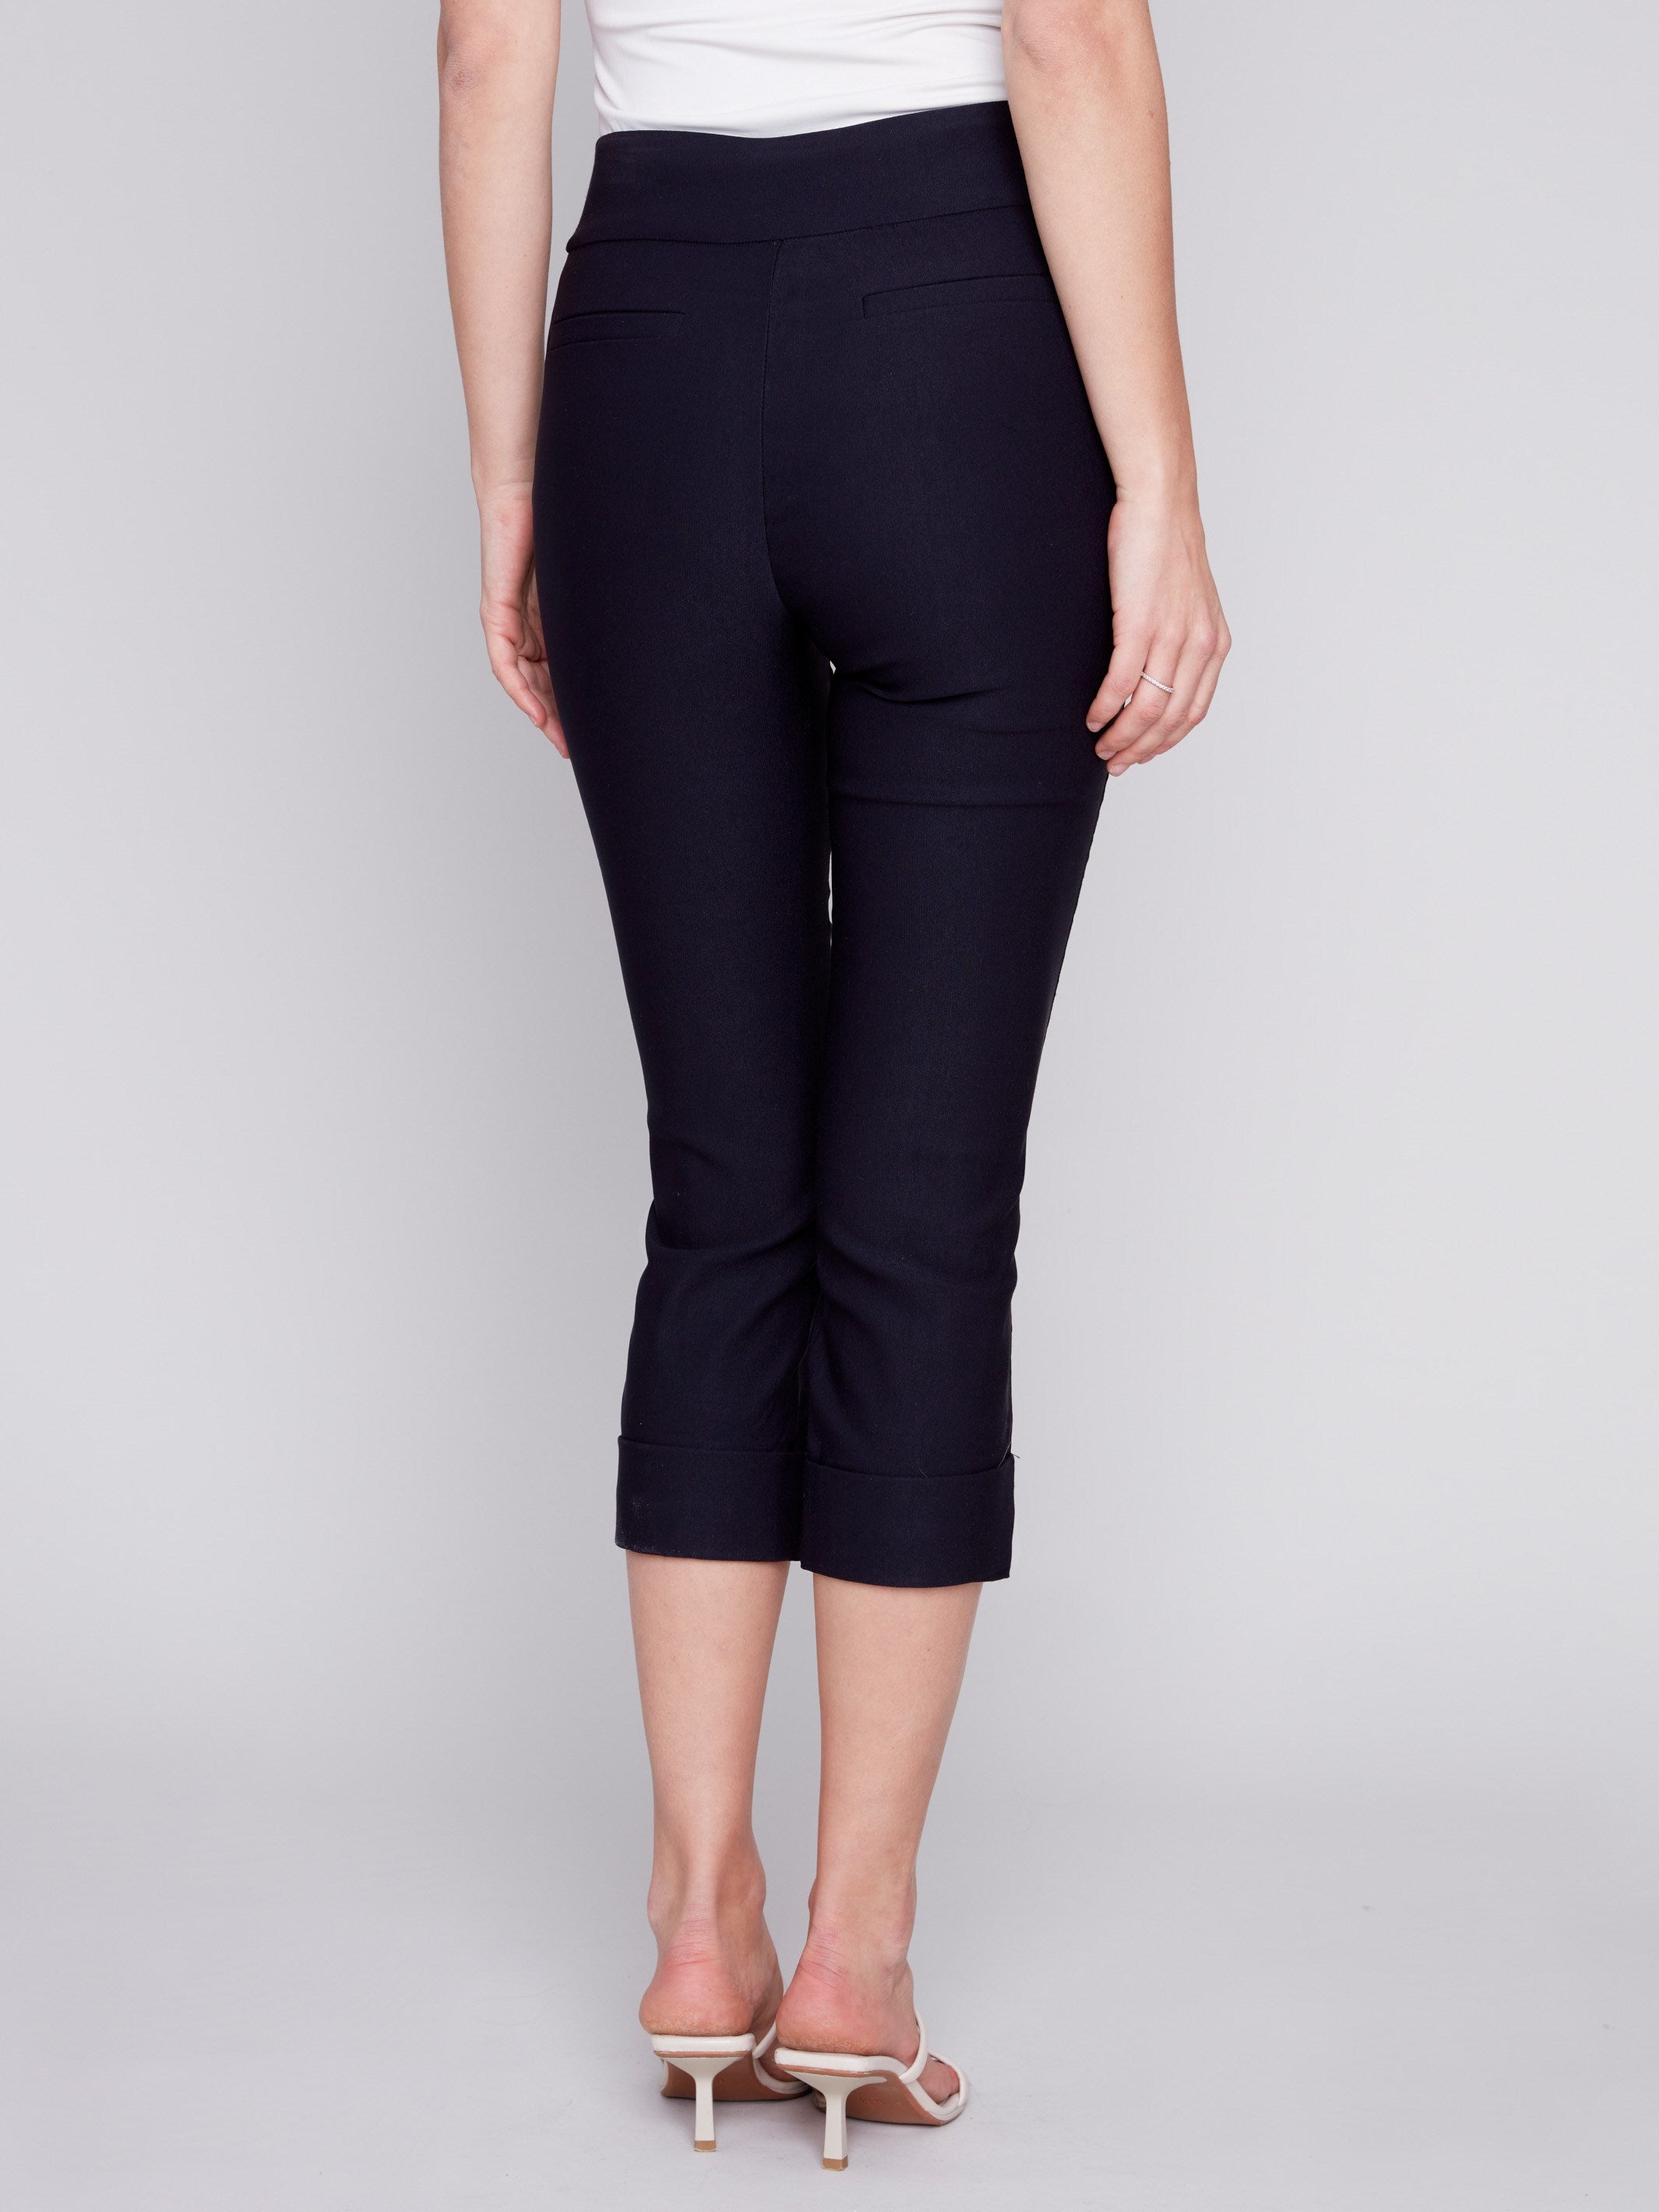 Stretch Pull-On Capri Pants - Black - Charlie B Collection Canada - Image 3